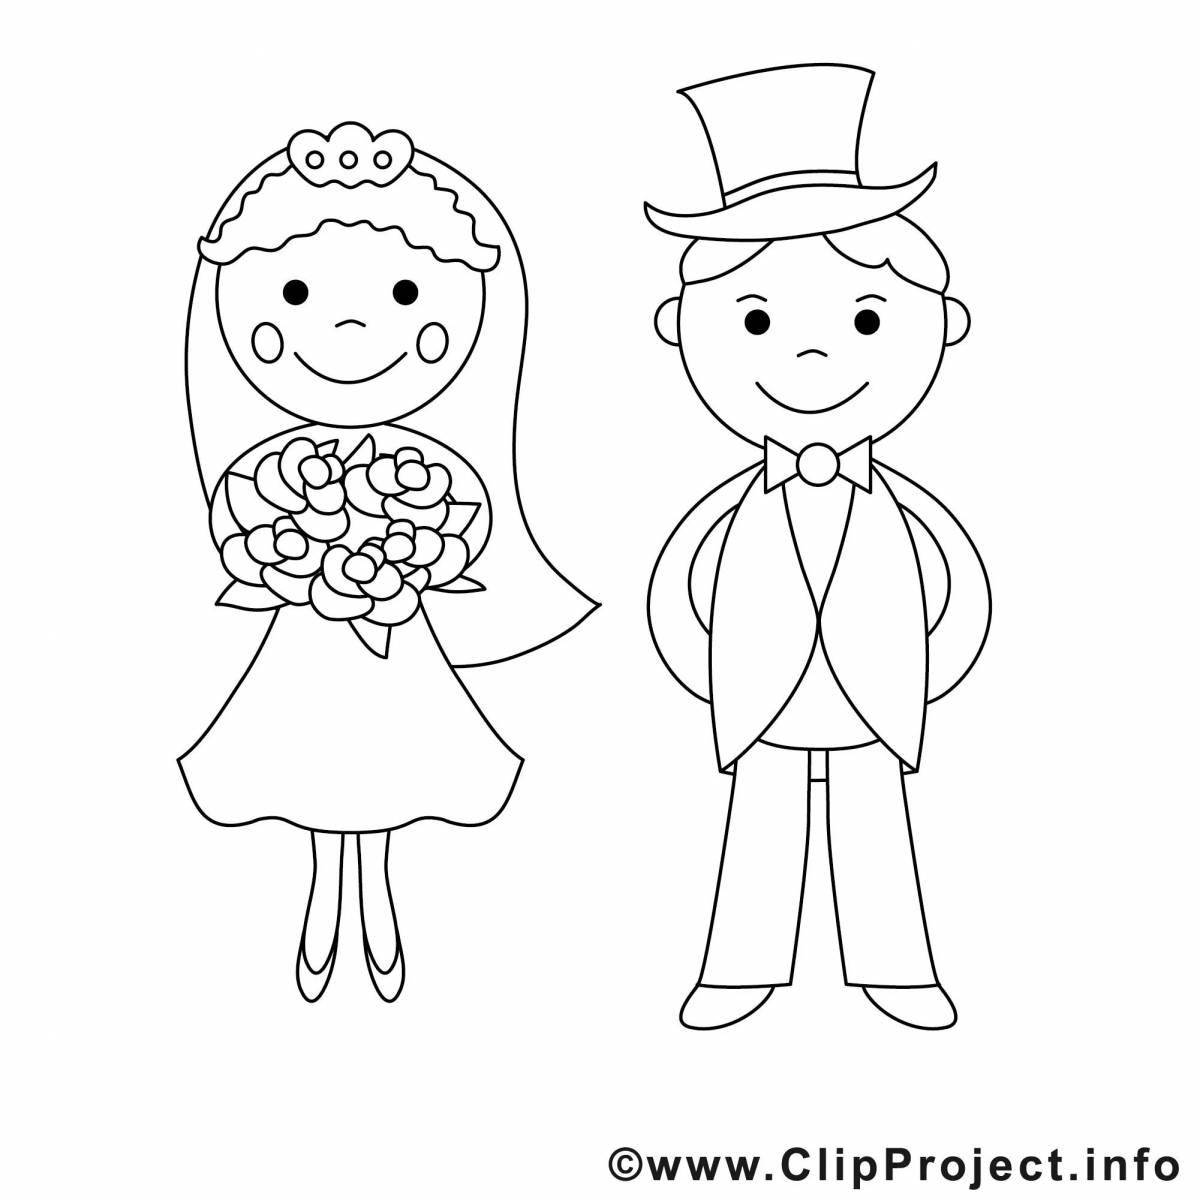 Sublime bride and groom coloring page